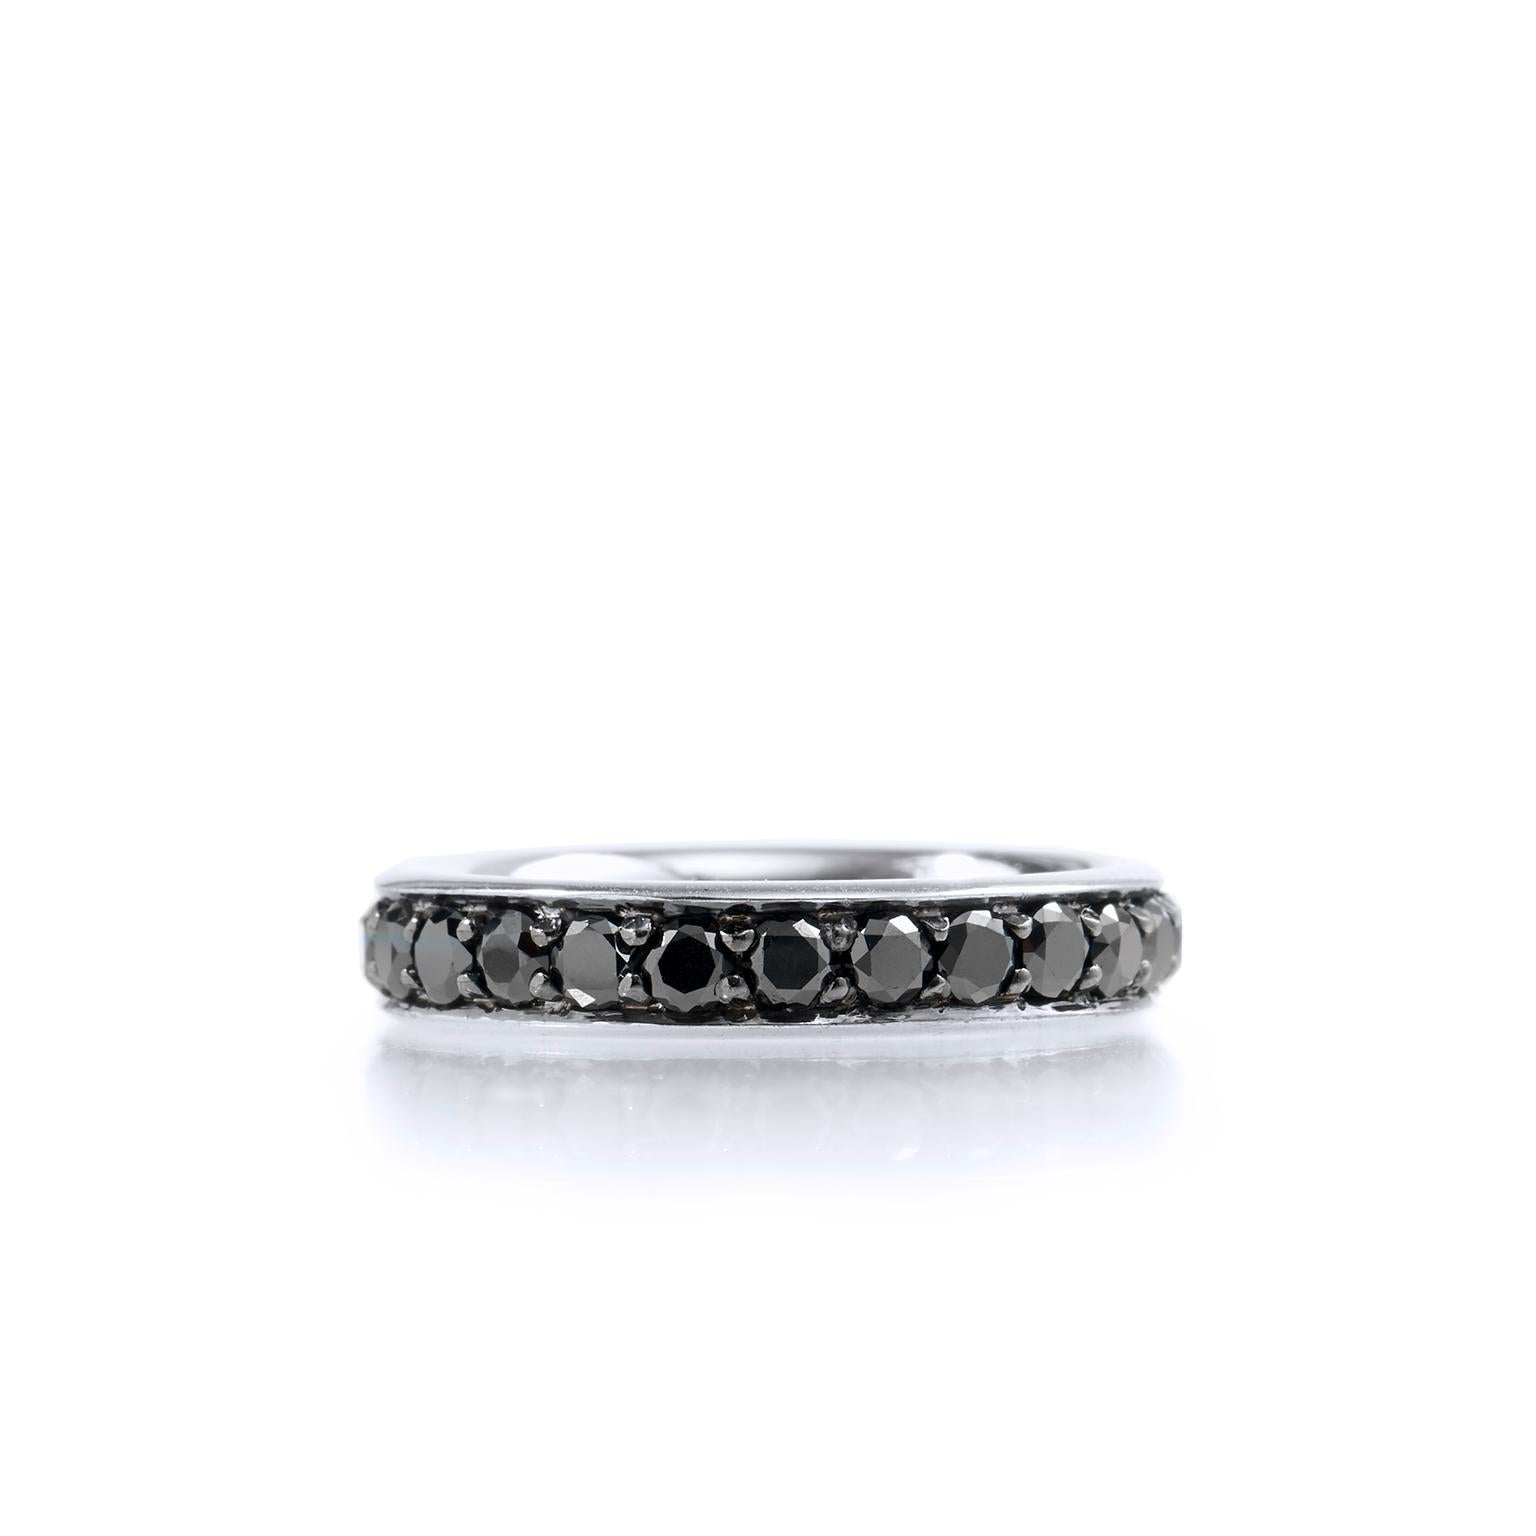 H&H 1.65 Carat Black Diamond Band Ring In Excellent Condition For Sale In Miami, FL